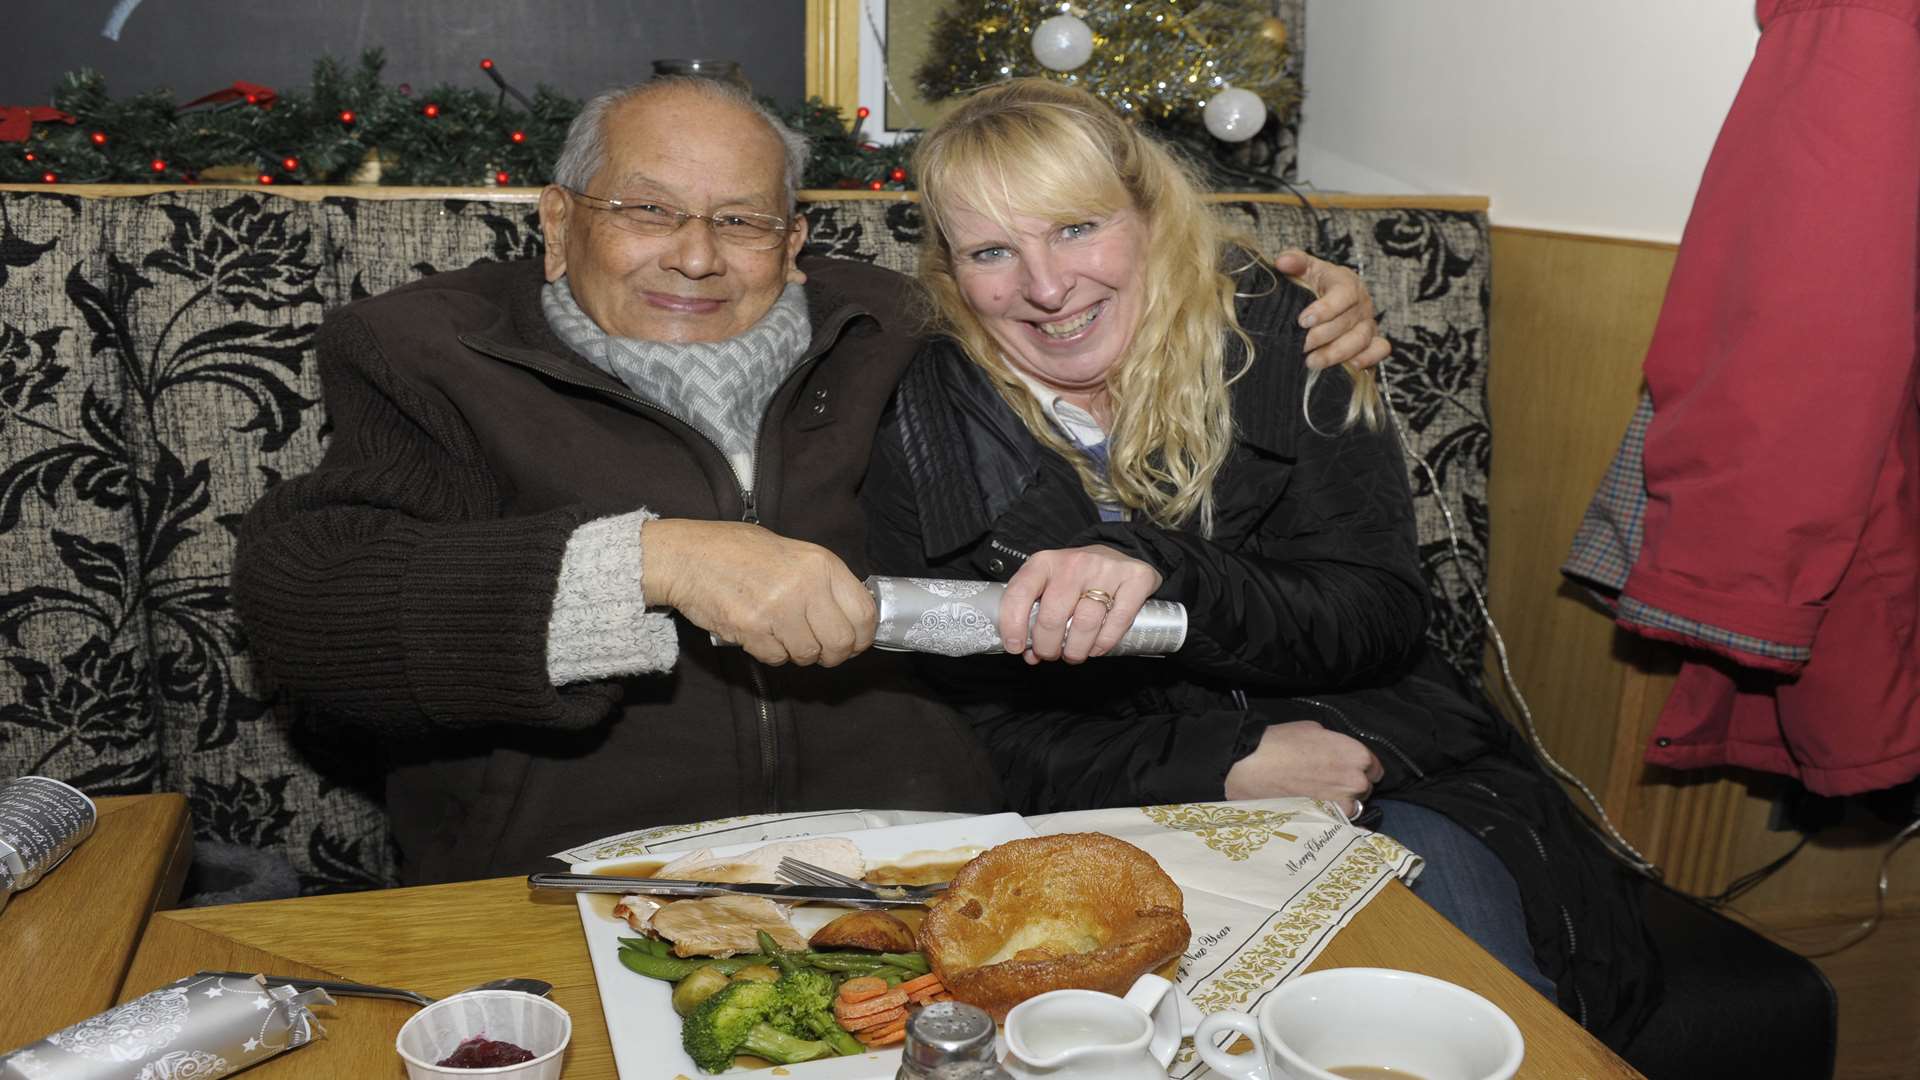 Ron Valense pulls a cracker with Louise Collins from the Thanet Volunteer Bureau at The Hoy free Christmas dinner event